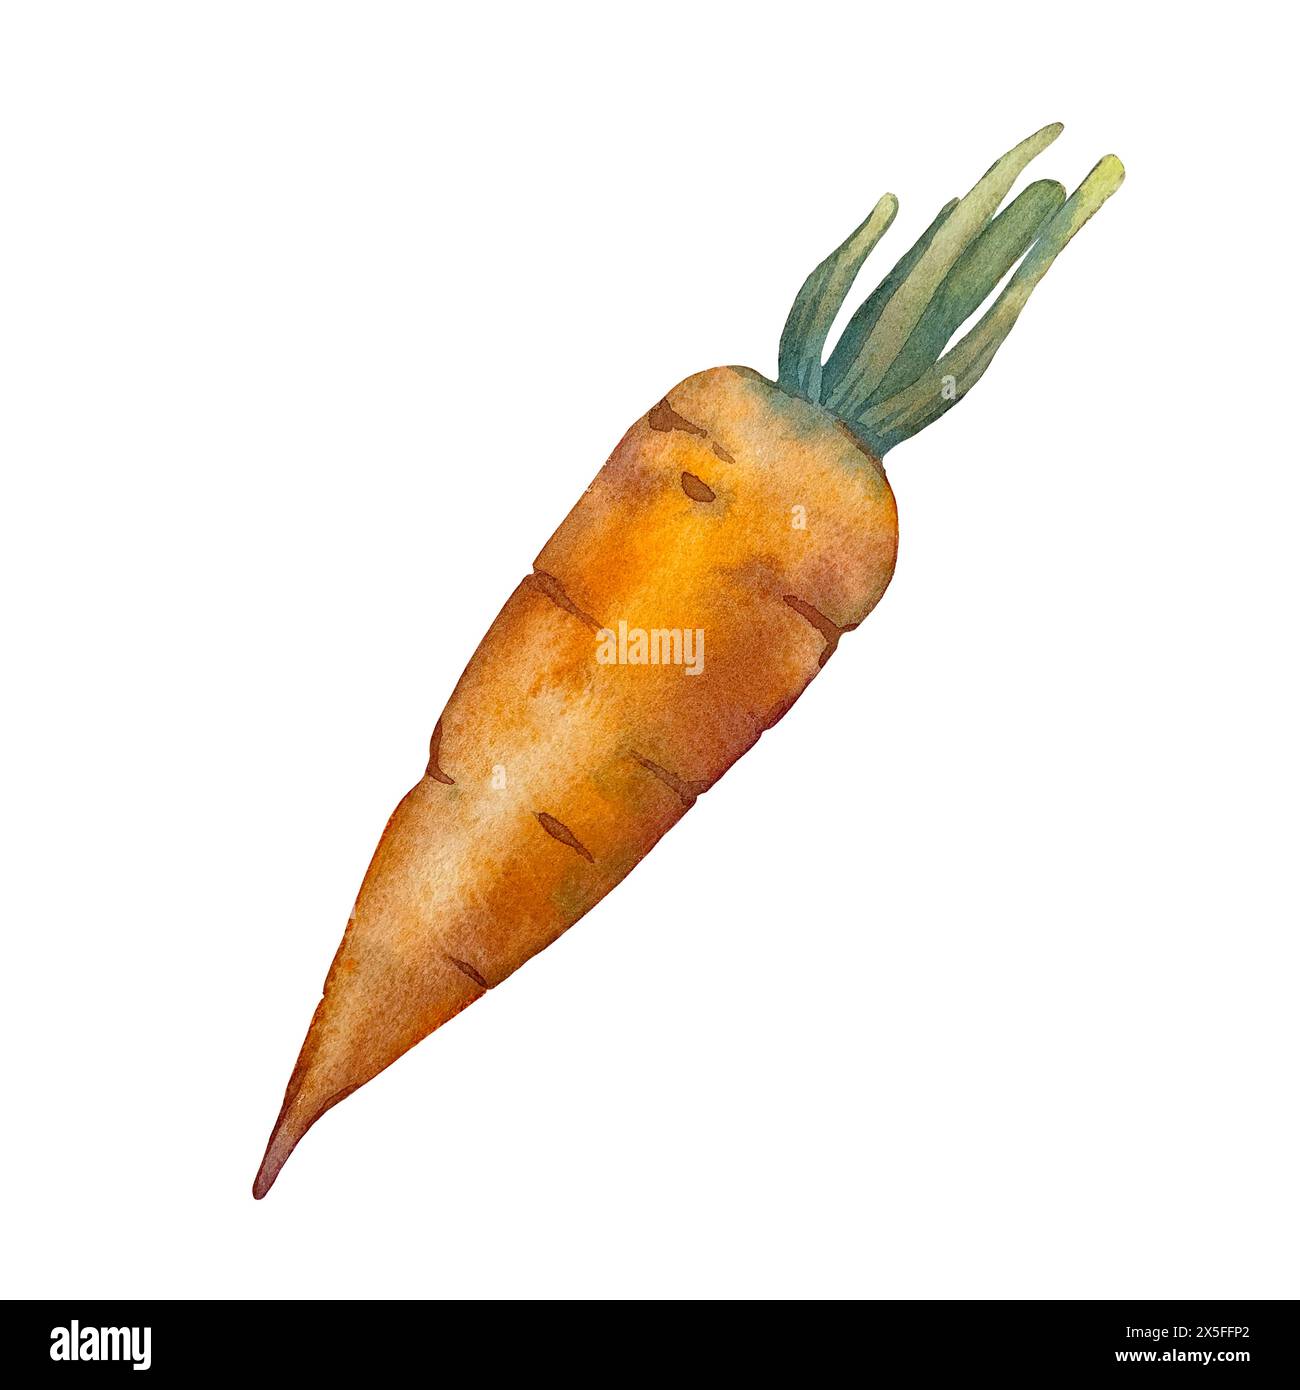 Carrot watercolor hand drawn illustration isolated on white background.  Stock Photo